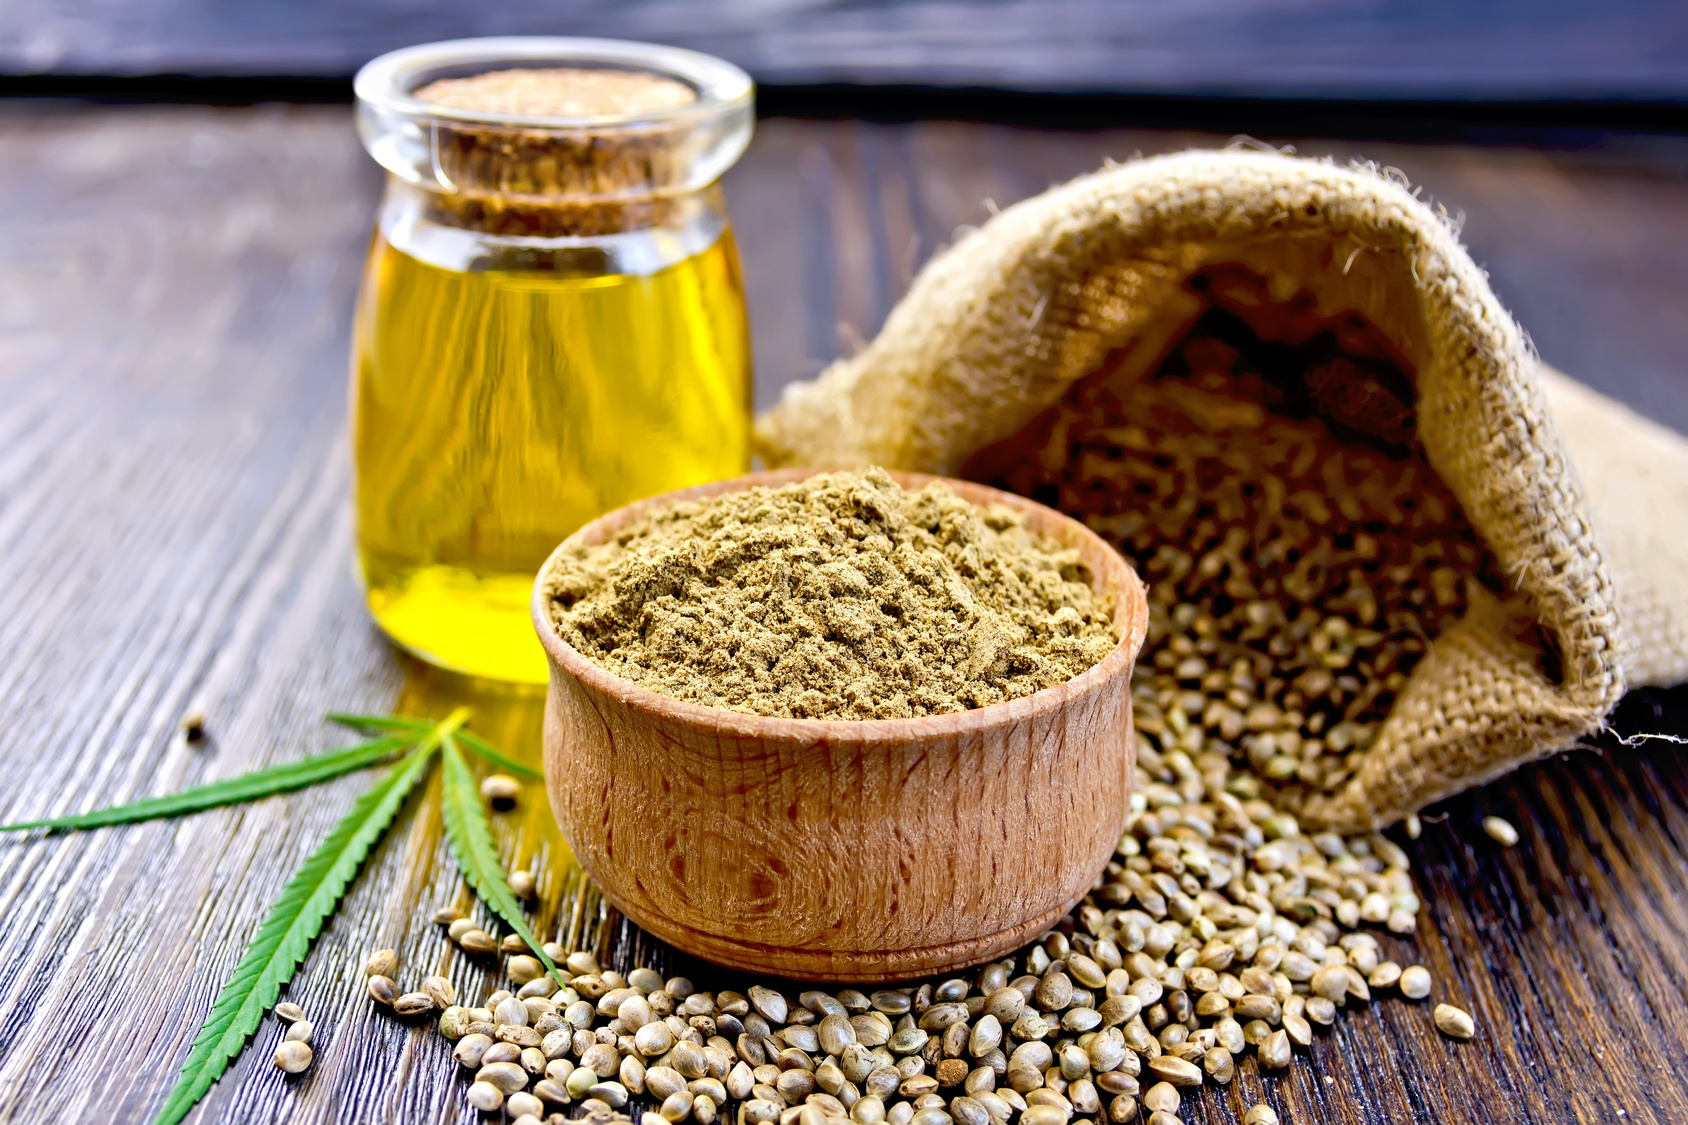 Hemp Flour in a wooden bowl, hemp seed in a bag and on the table, hemp oil in a glass jar, hemp leaf on the background of wooden boards